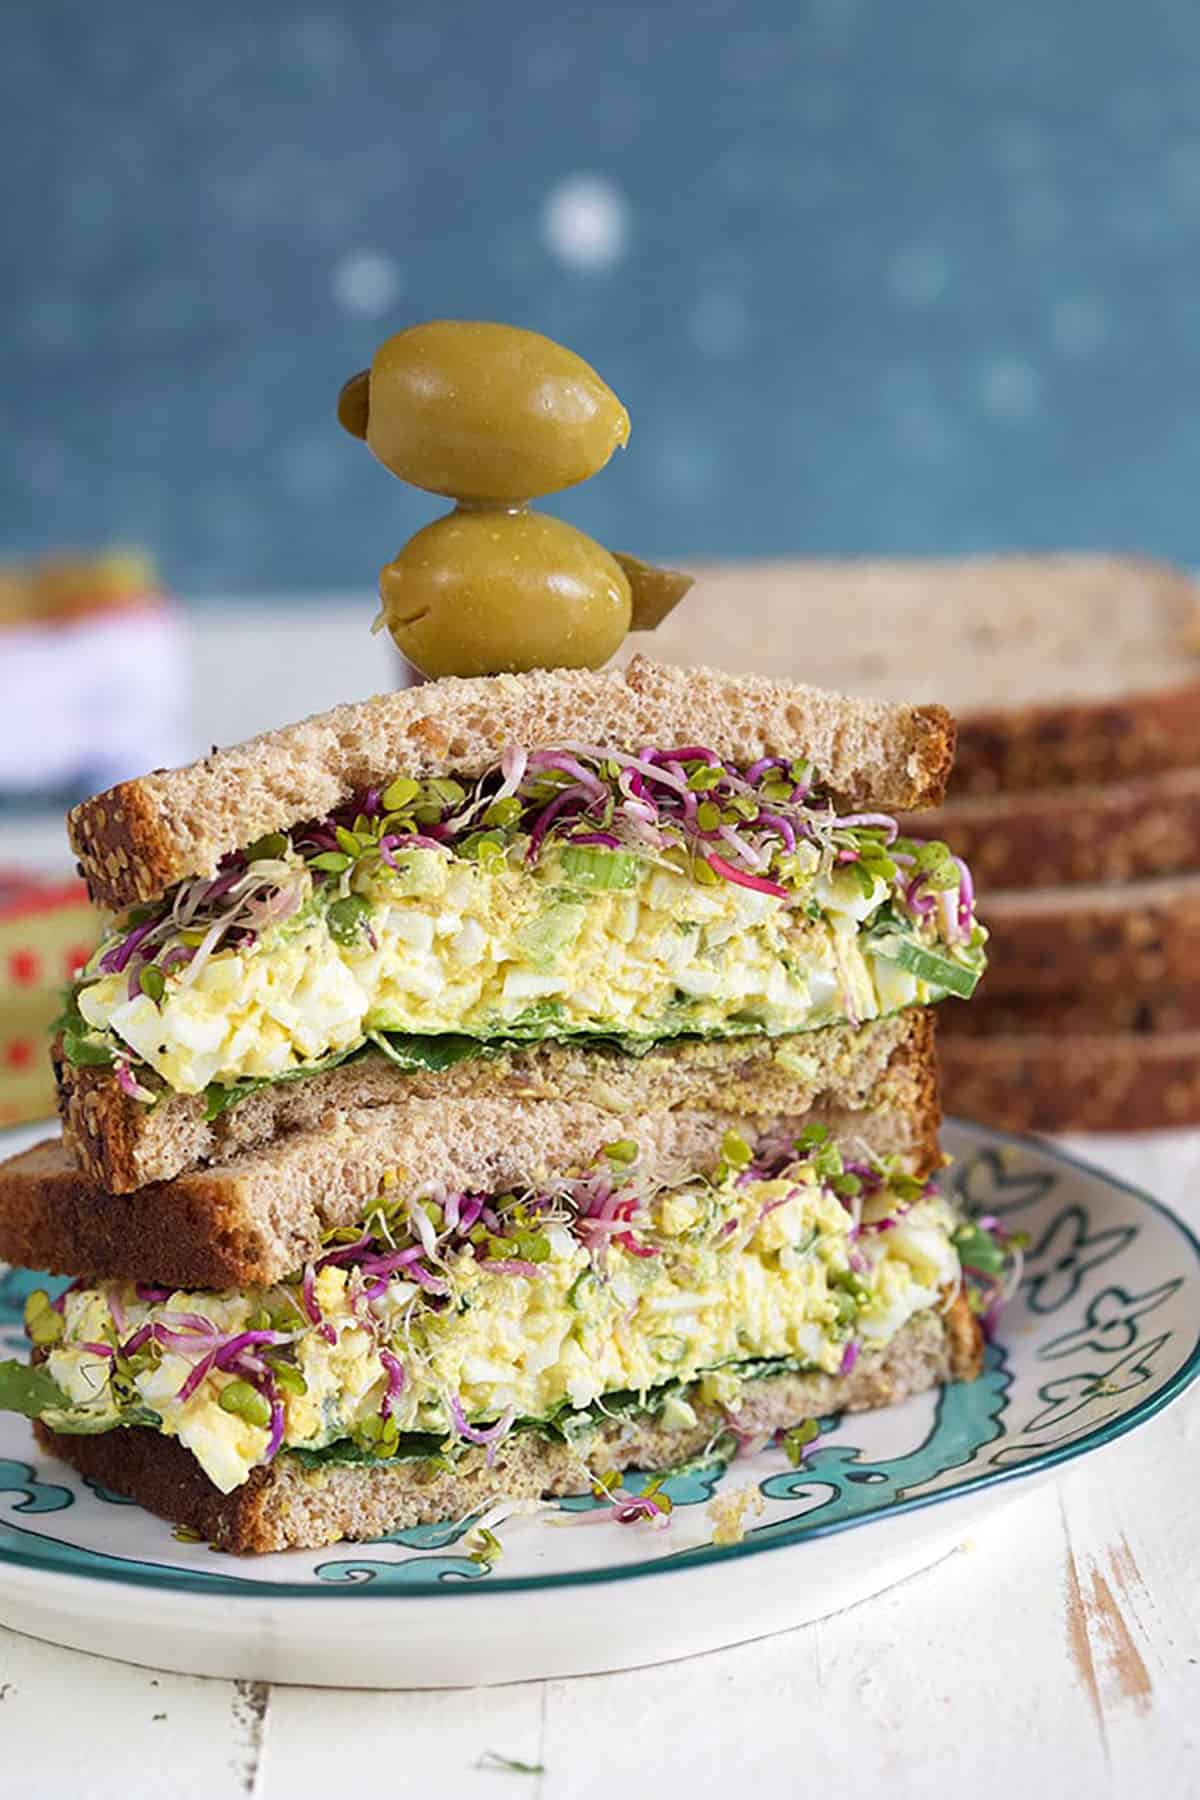 Egg salad sandwich with olives on top on a blue and white plate.